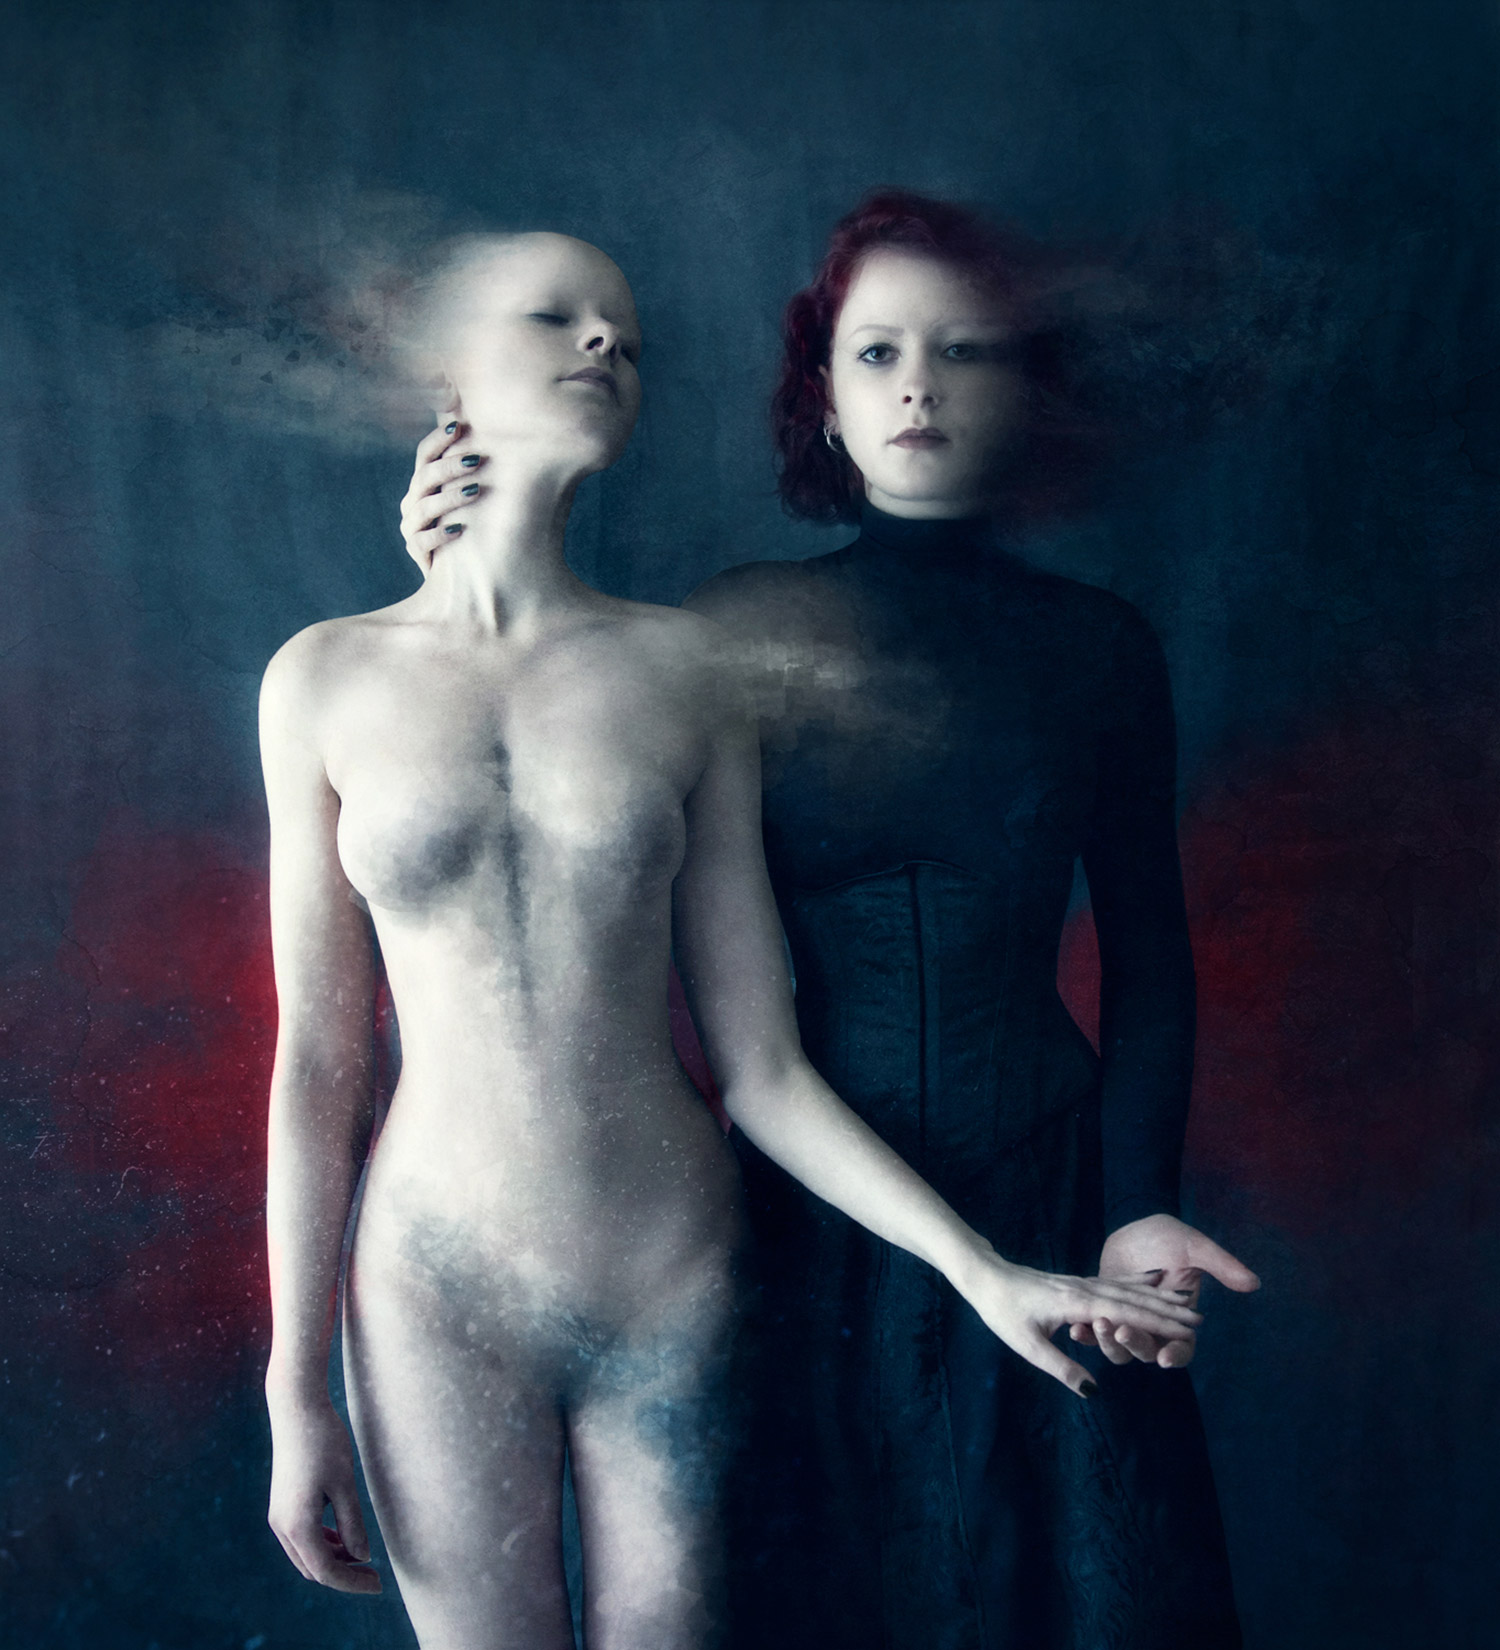 Daria Endresen - Untitled viii with Elise